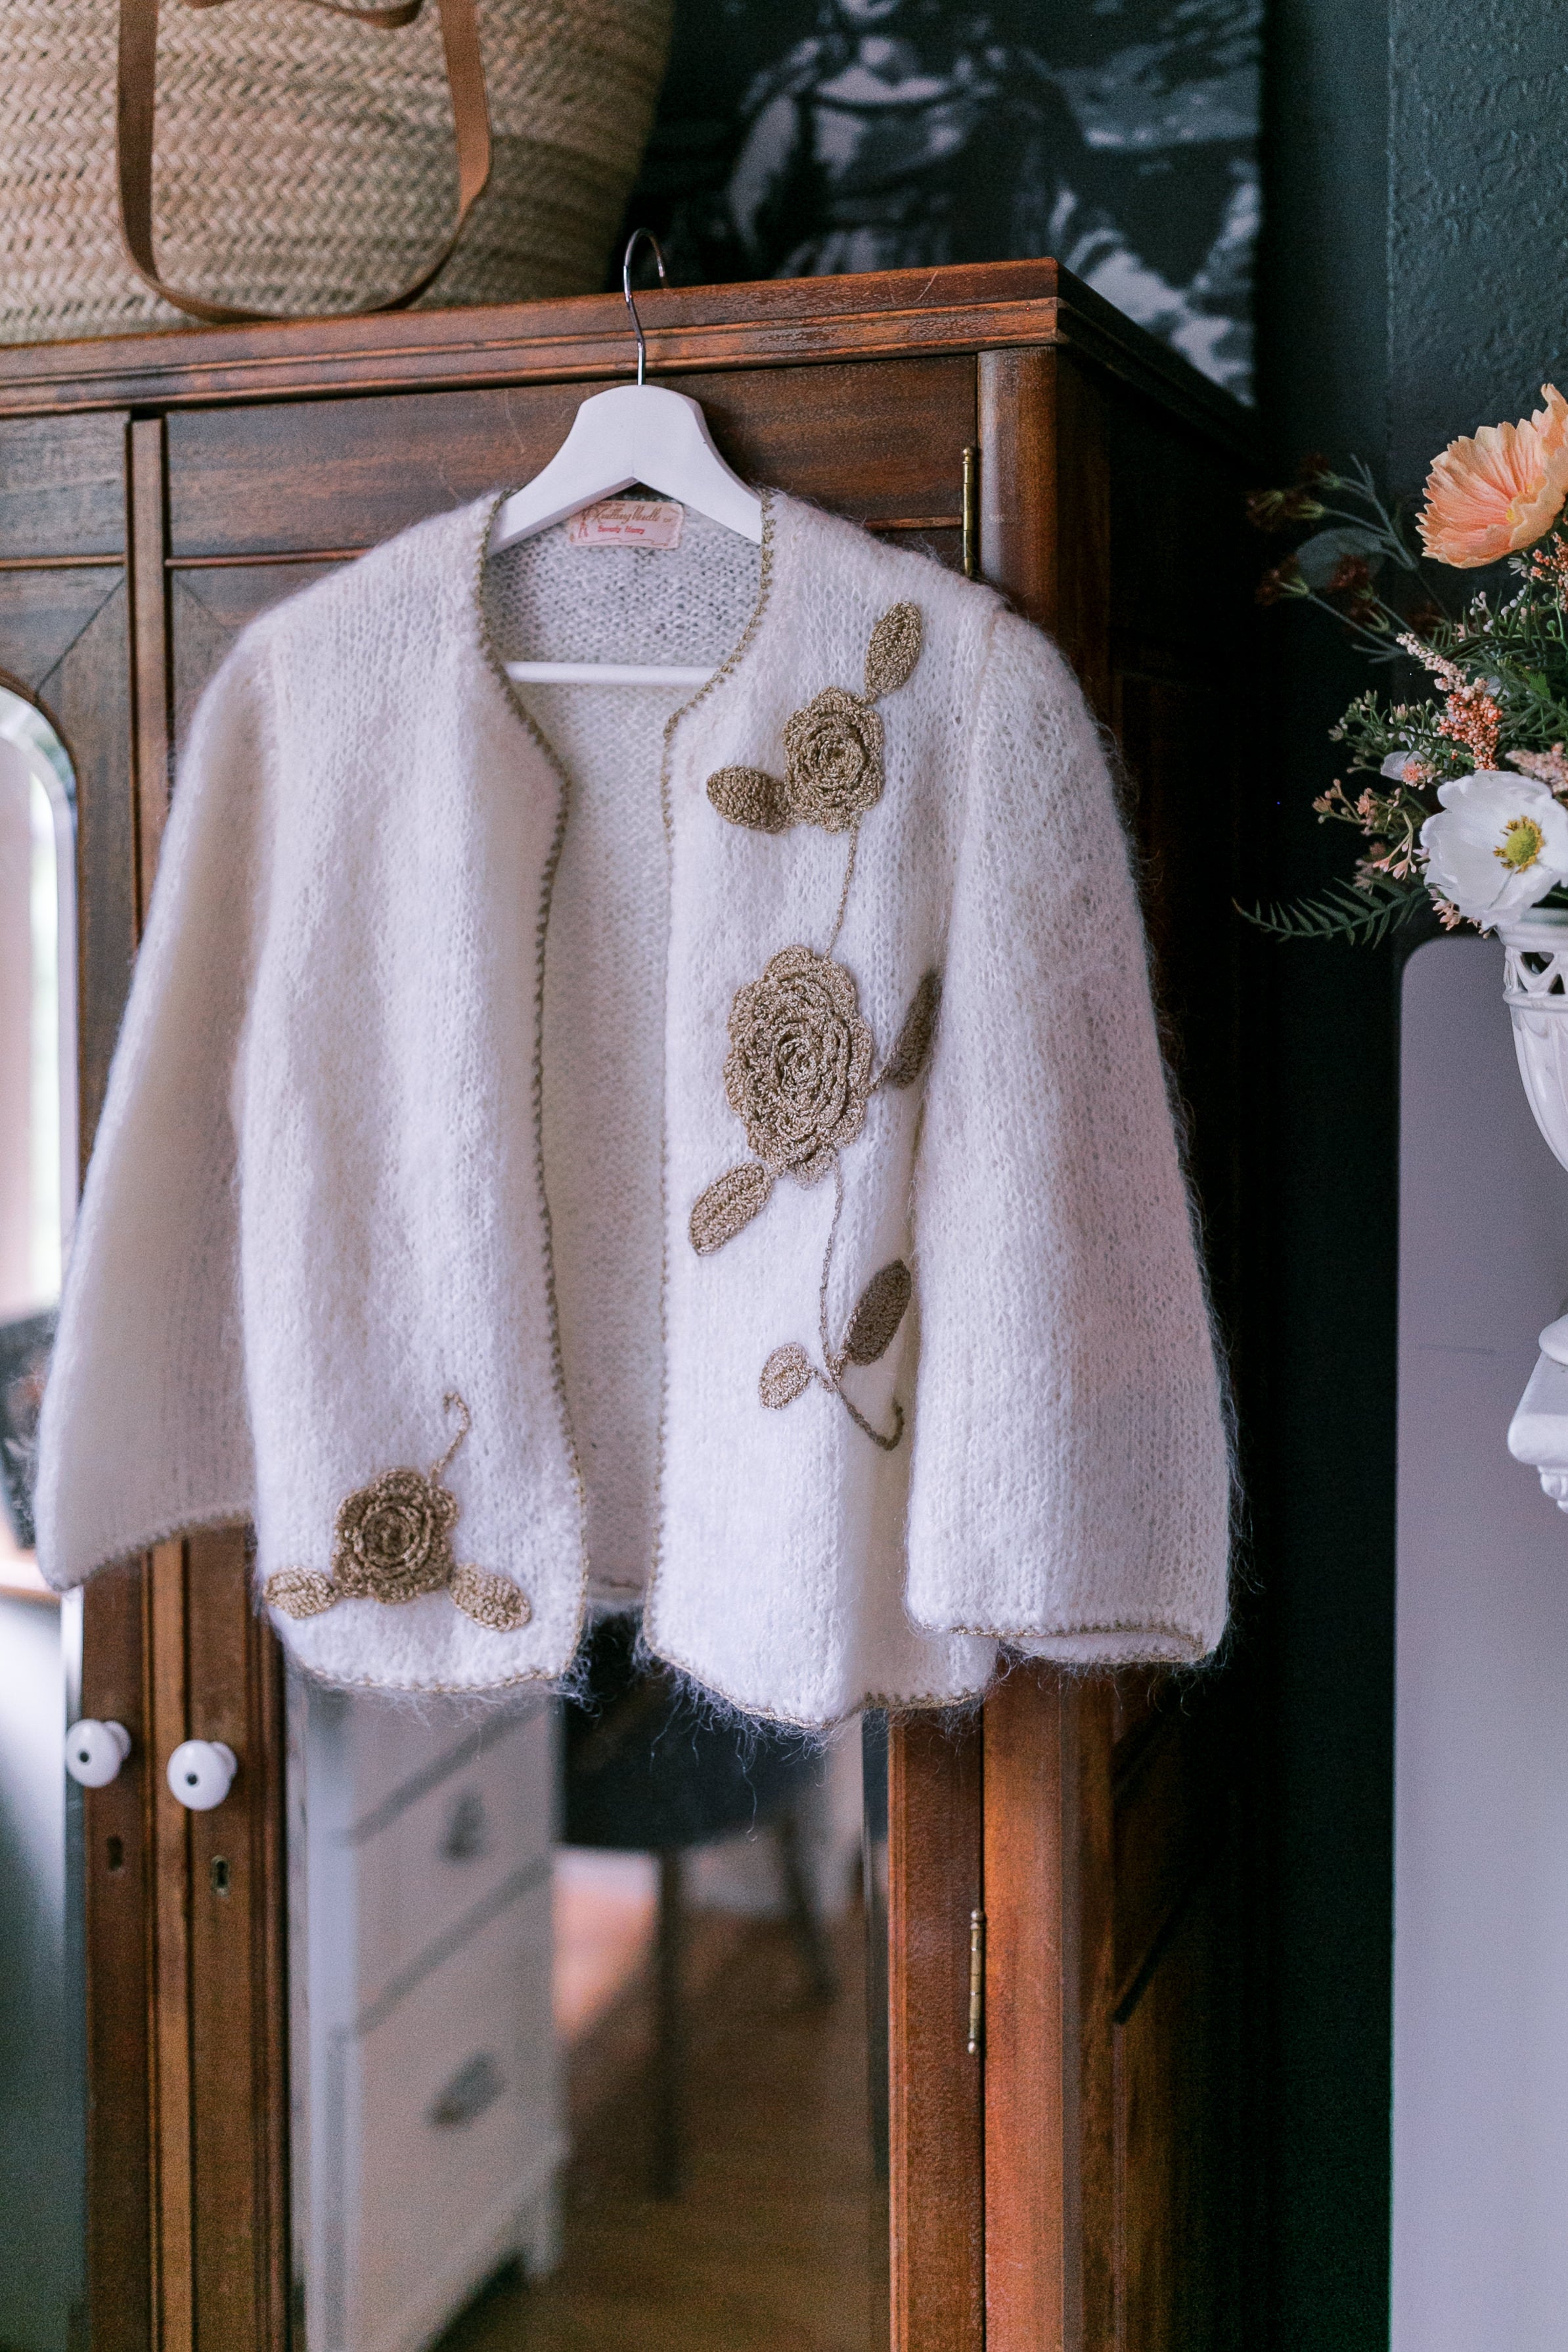 Handmade Parisian-Inspired Knitted Floral Appliqué Sweater